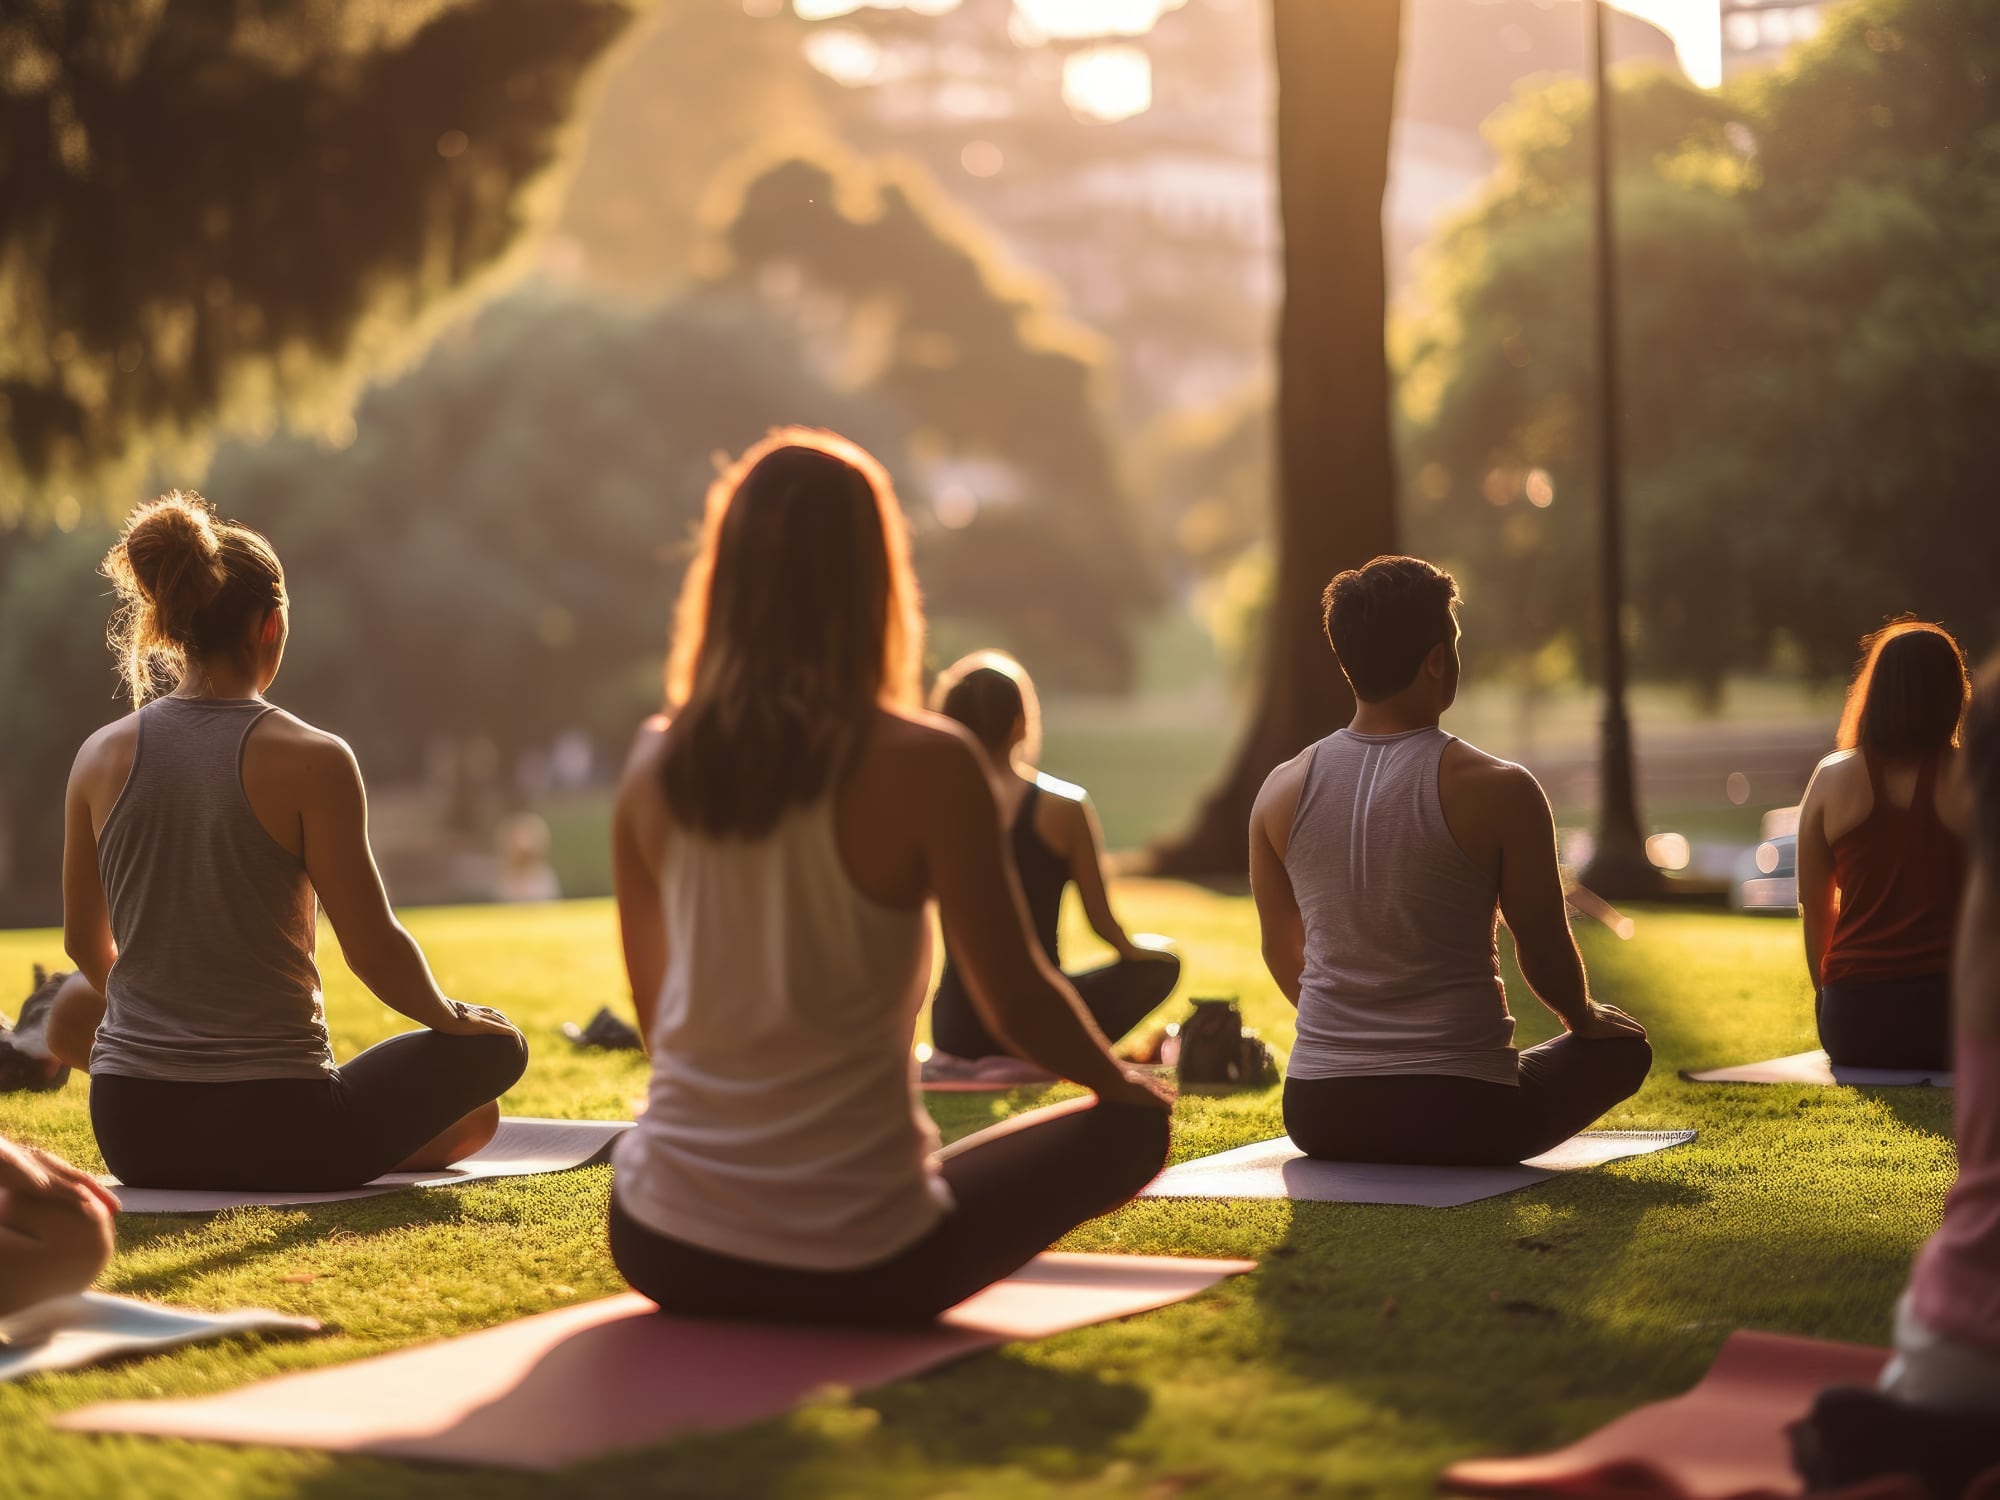 A group of people doing yoga in a park on a sunny day.